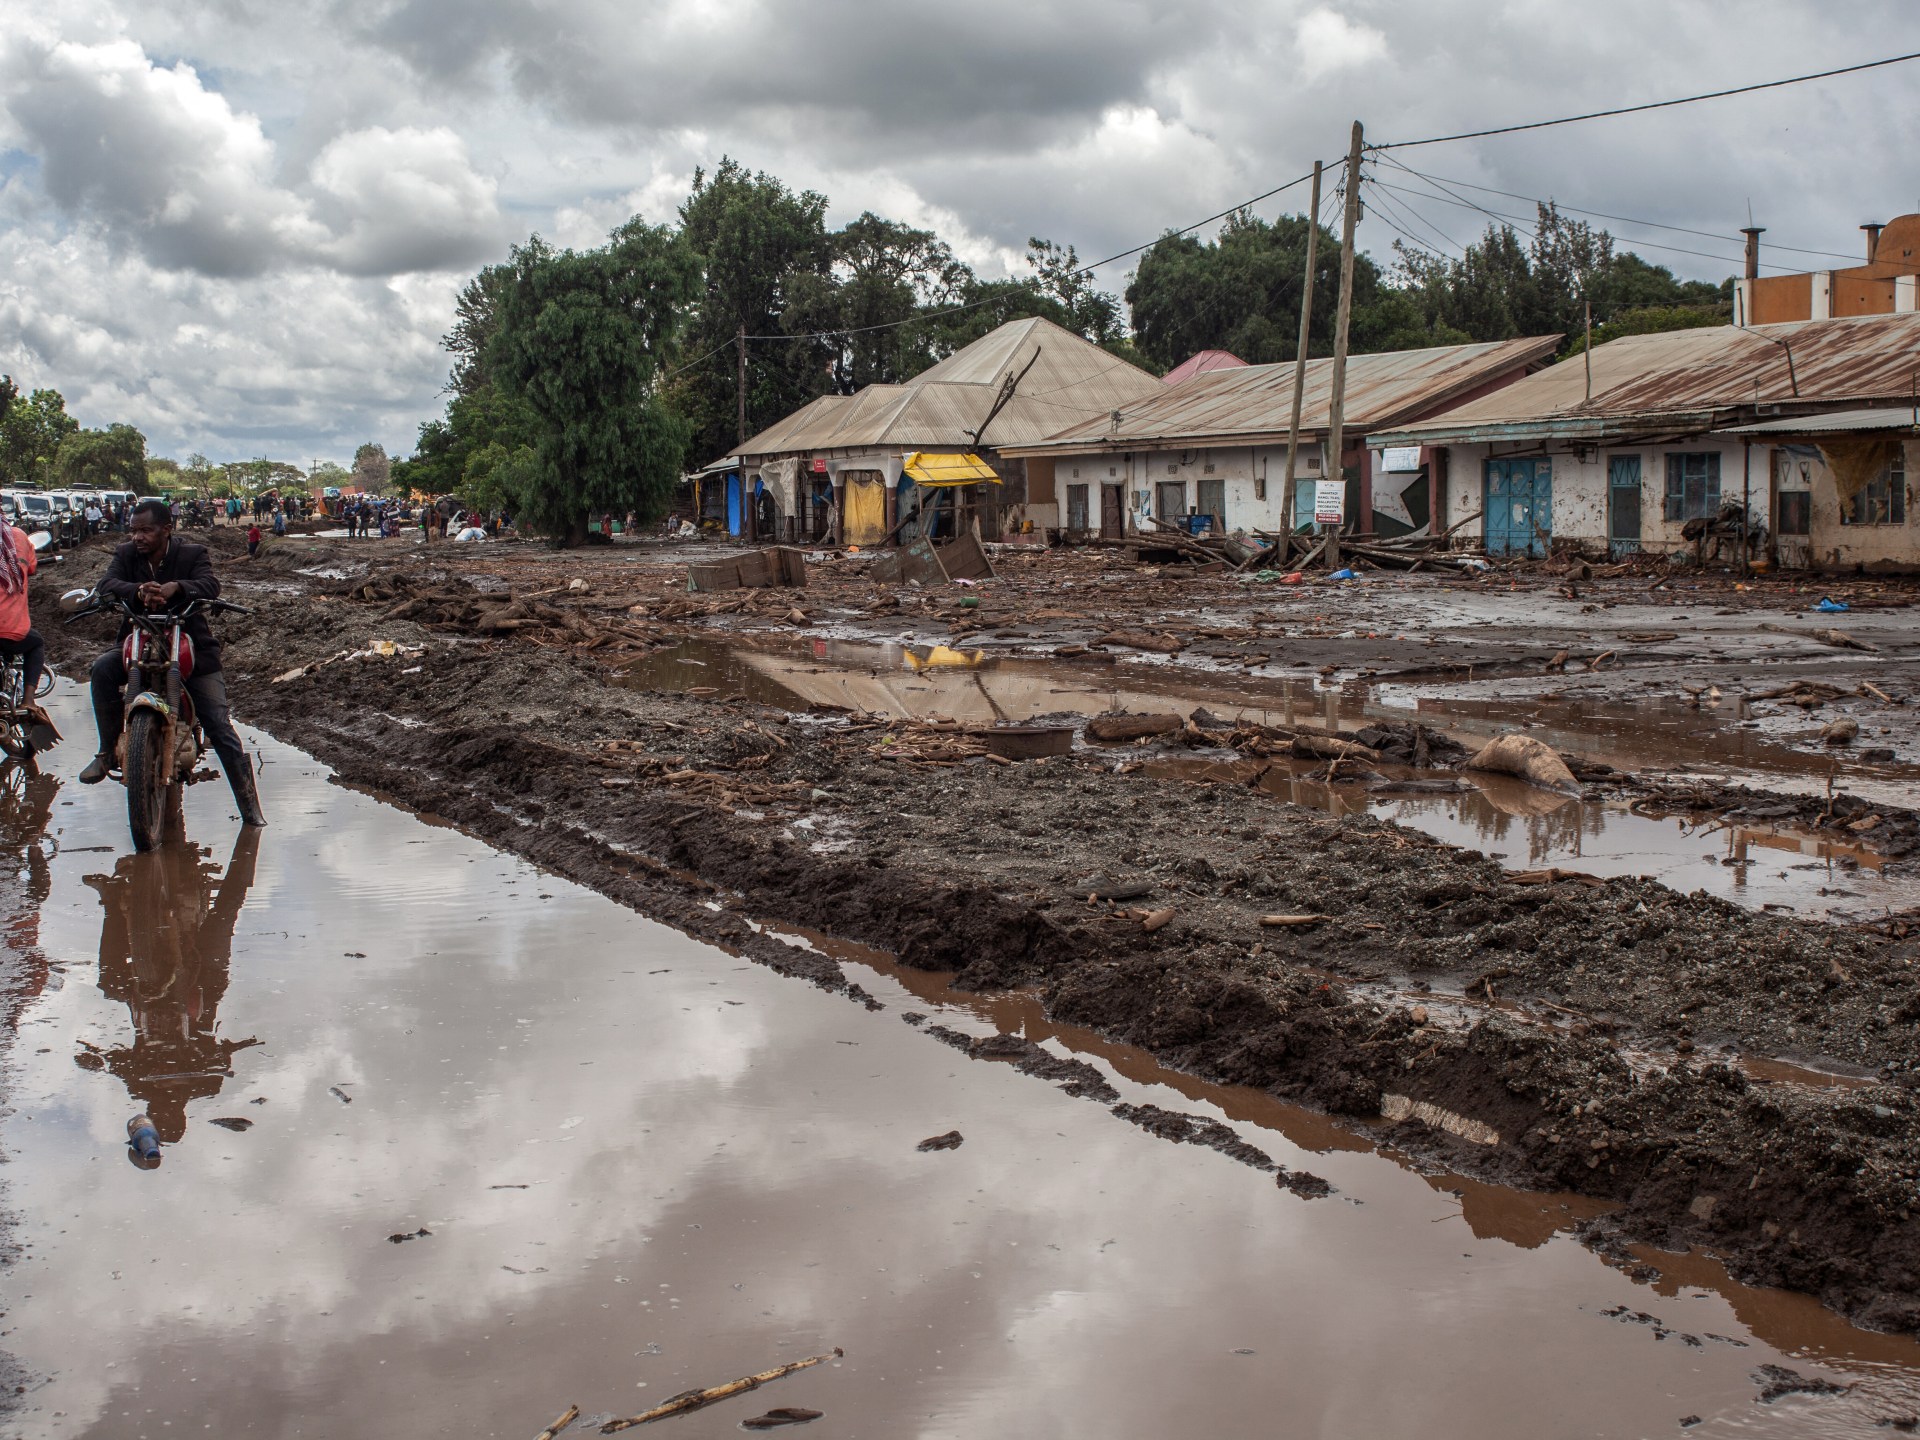 Heavy rains and landslides kill at least 65 in Tanzania | Floods News #Heavy #rains #landslides #kill #Tanzania #Floods #News